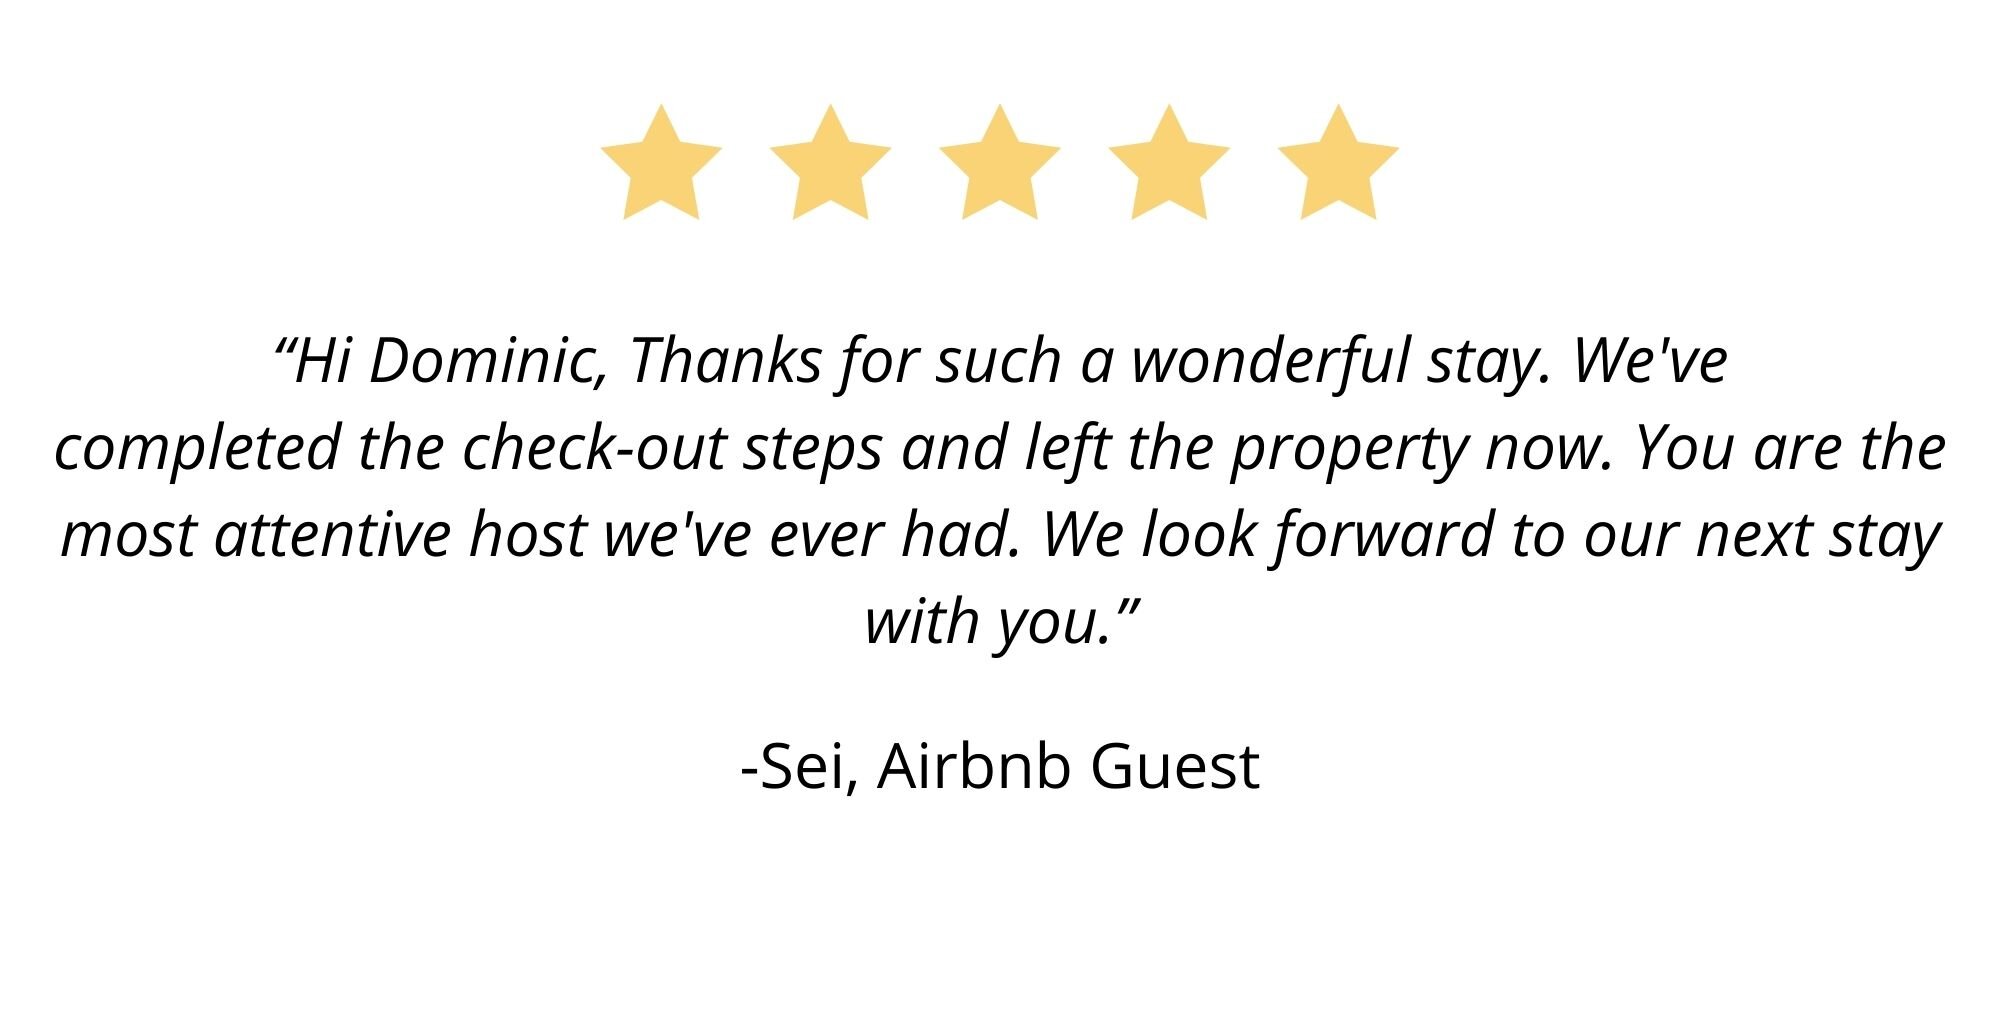 “Hi Dominic, Thanks for such a wonderful stay. We've completed the check-out steps and left the property now. You are the most attentive host we've ever had. We look forward to our next stay with you.” – Sei, Air.jpg